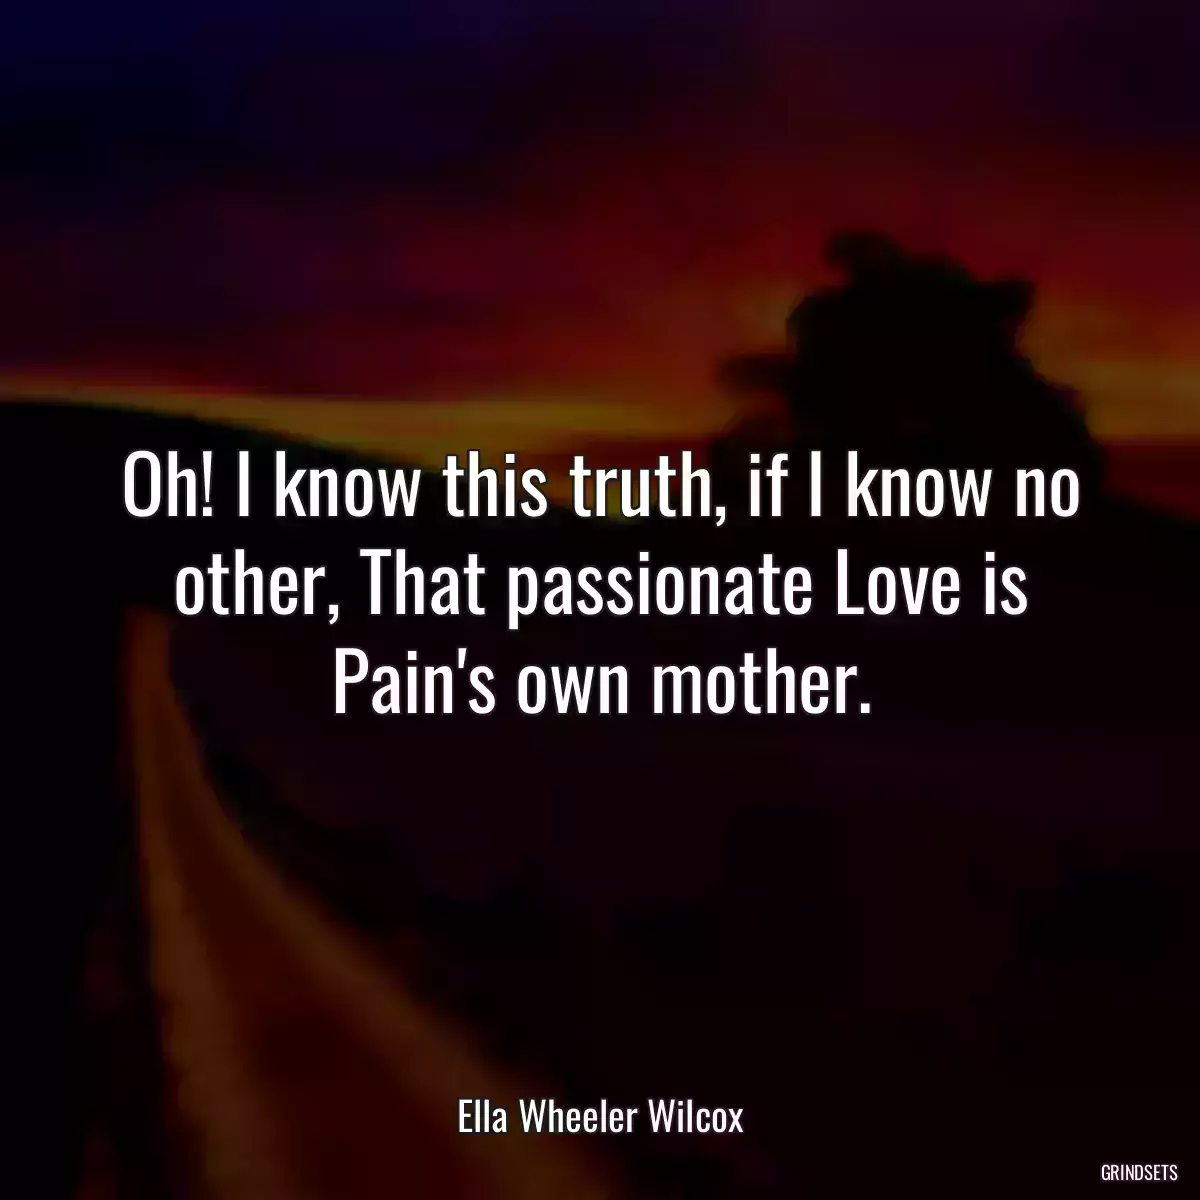 Oh! I know this truth, if I know no other, That passionate Love is Pain\'s own mother.